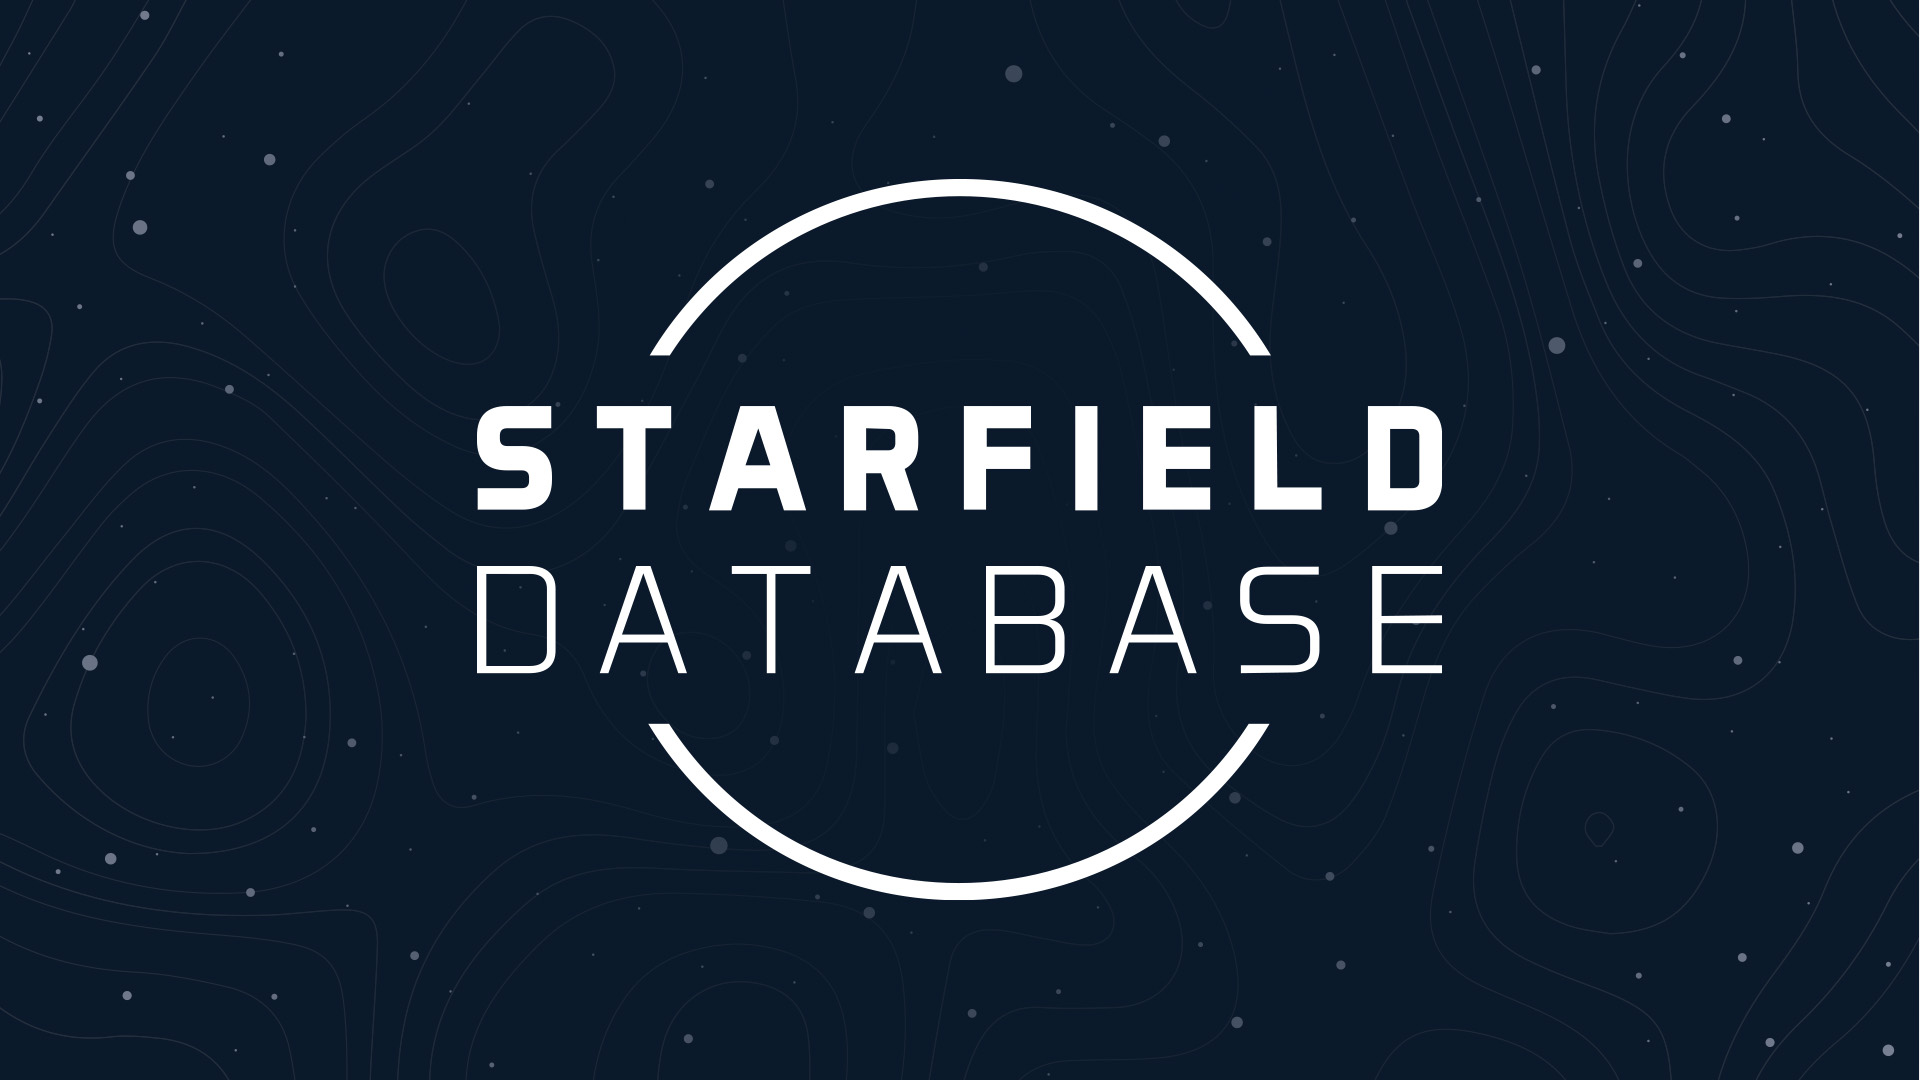 These Interactive Maps Will Help You Find Your Way in Starfield